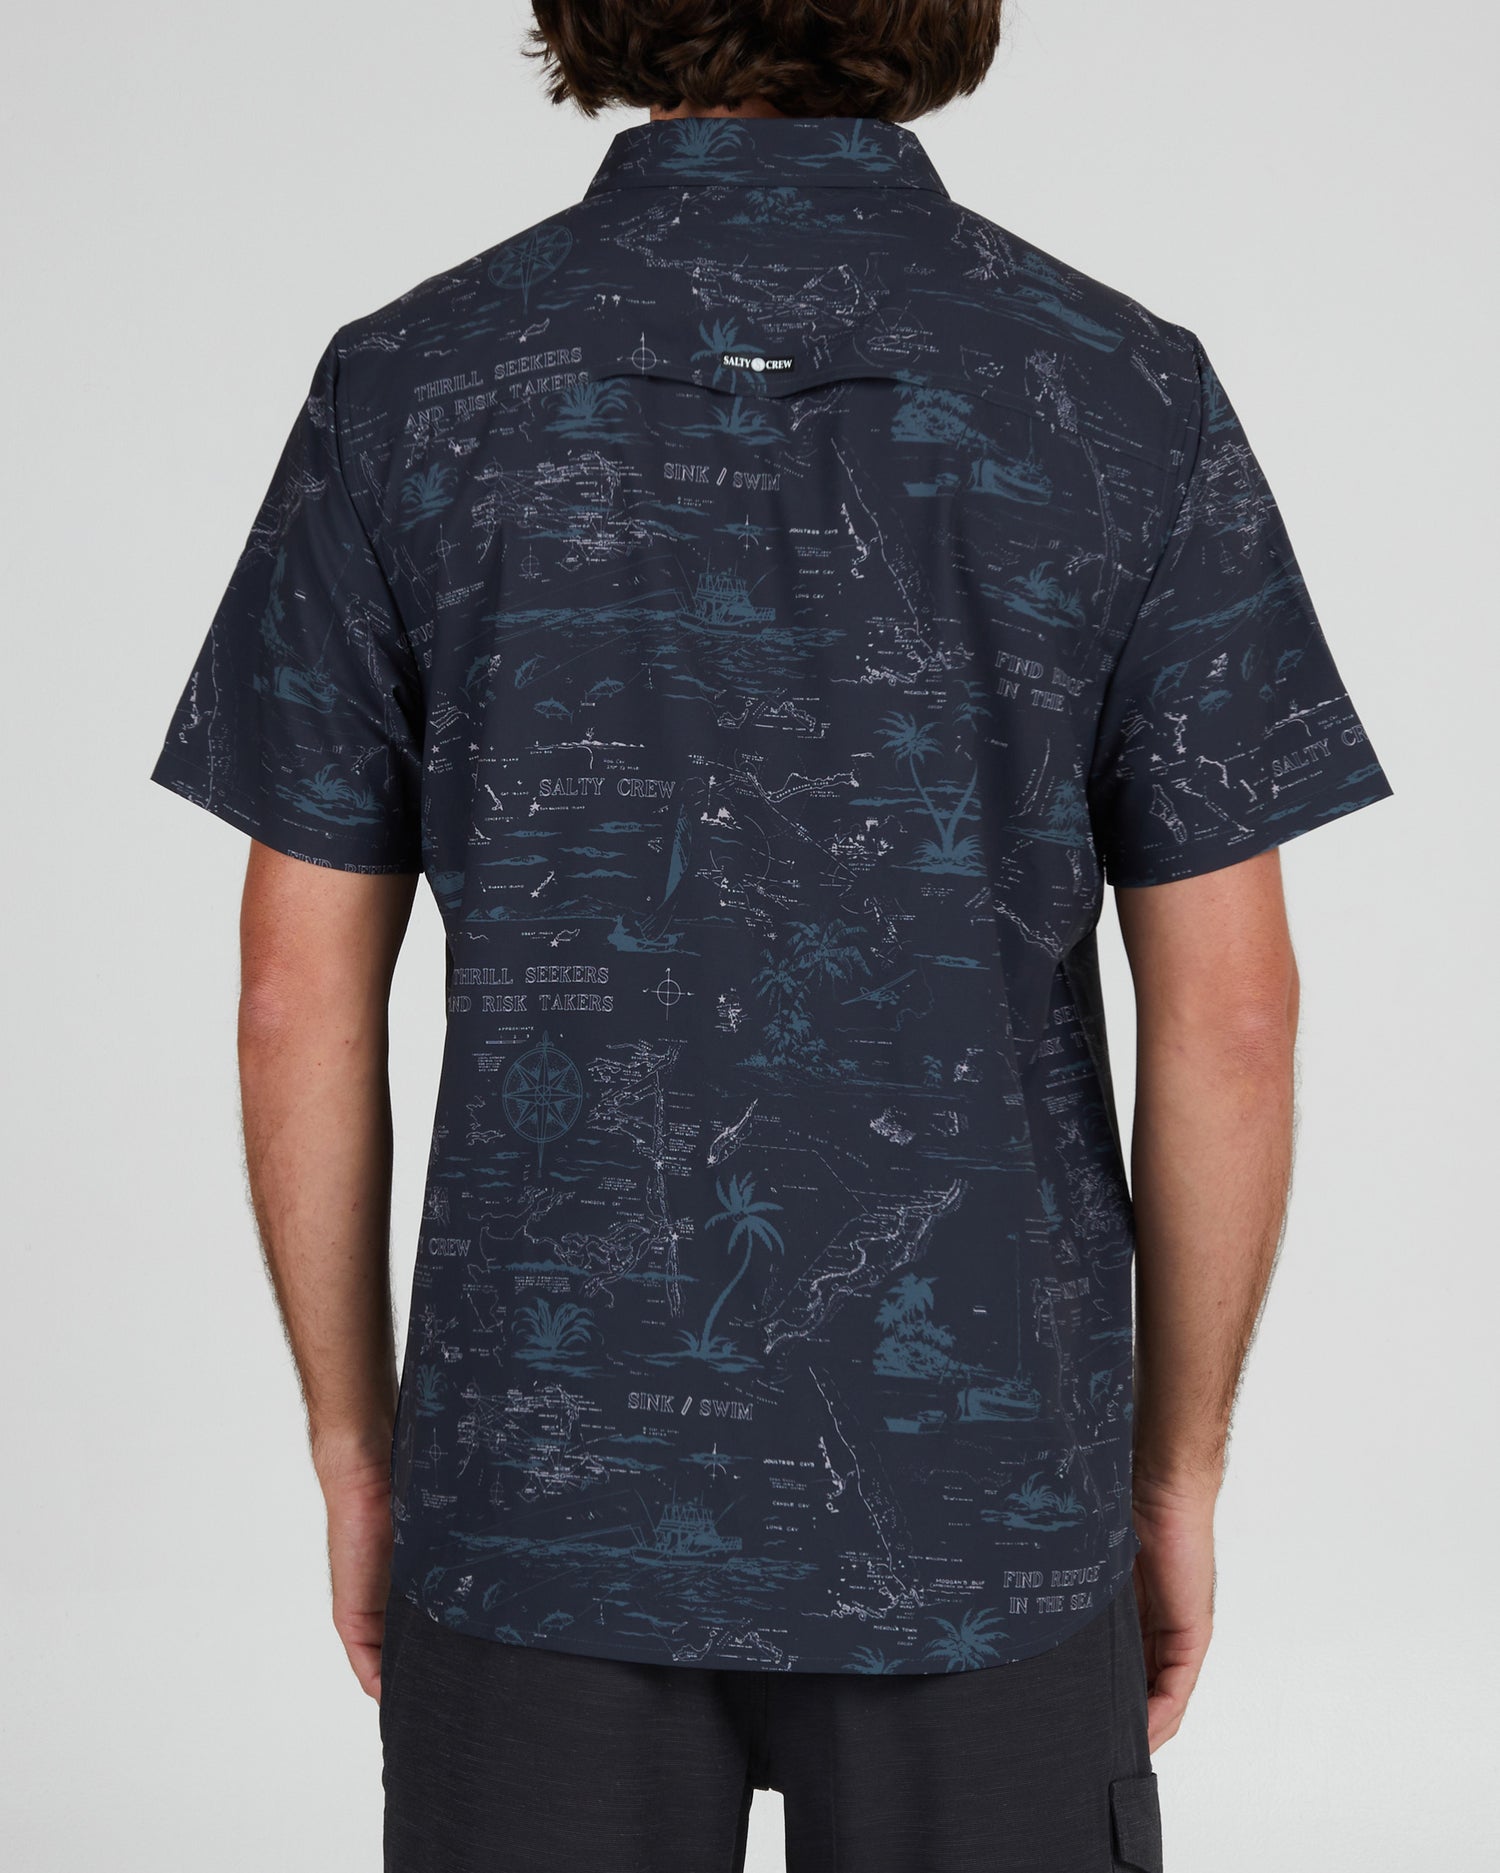 On body back of the Seafarer Black S/S Tech Woven